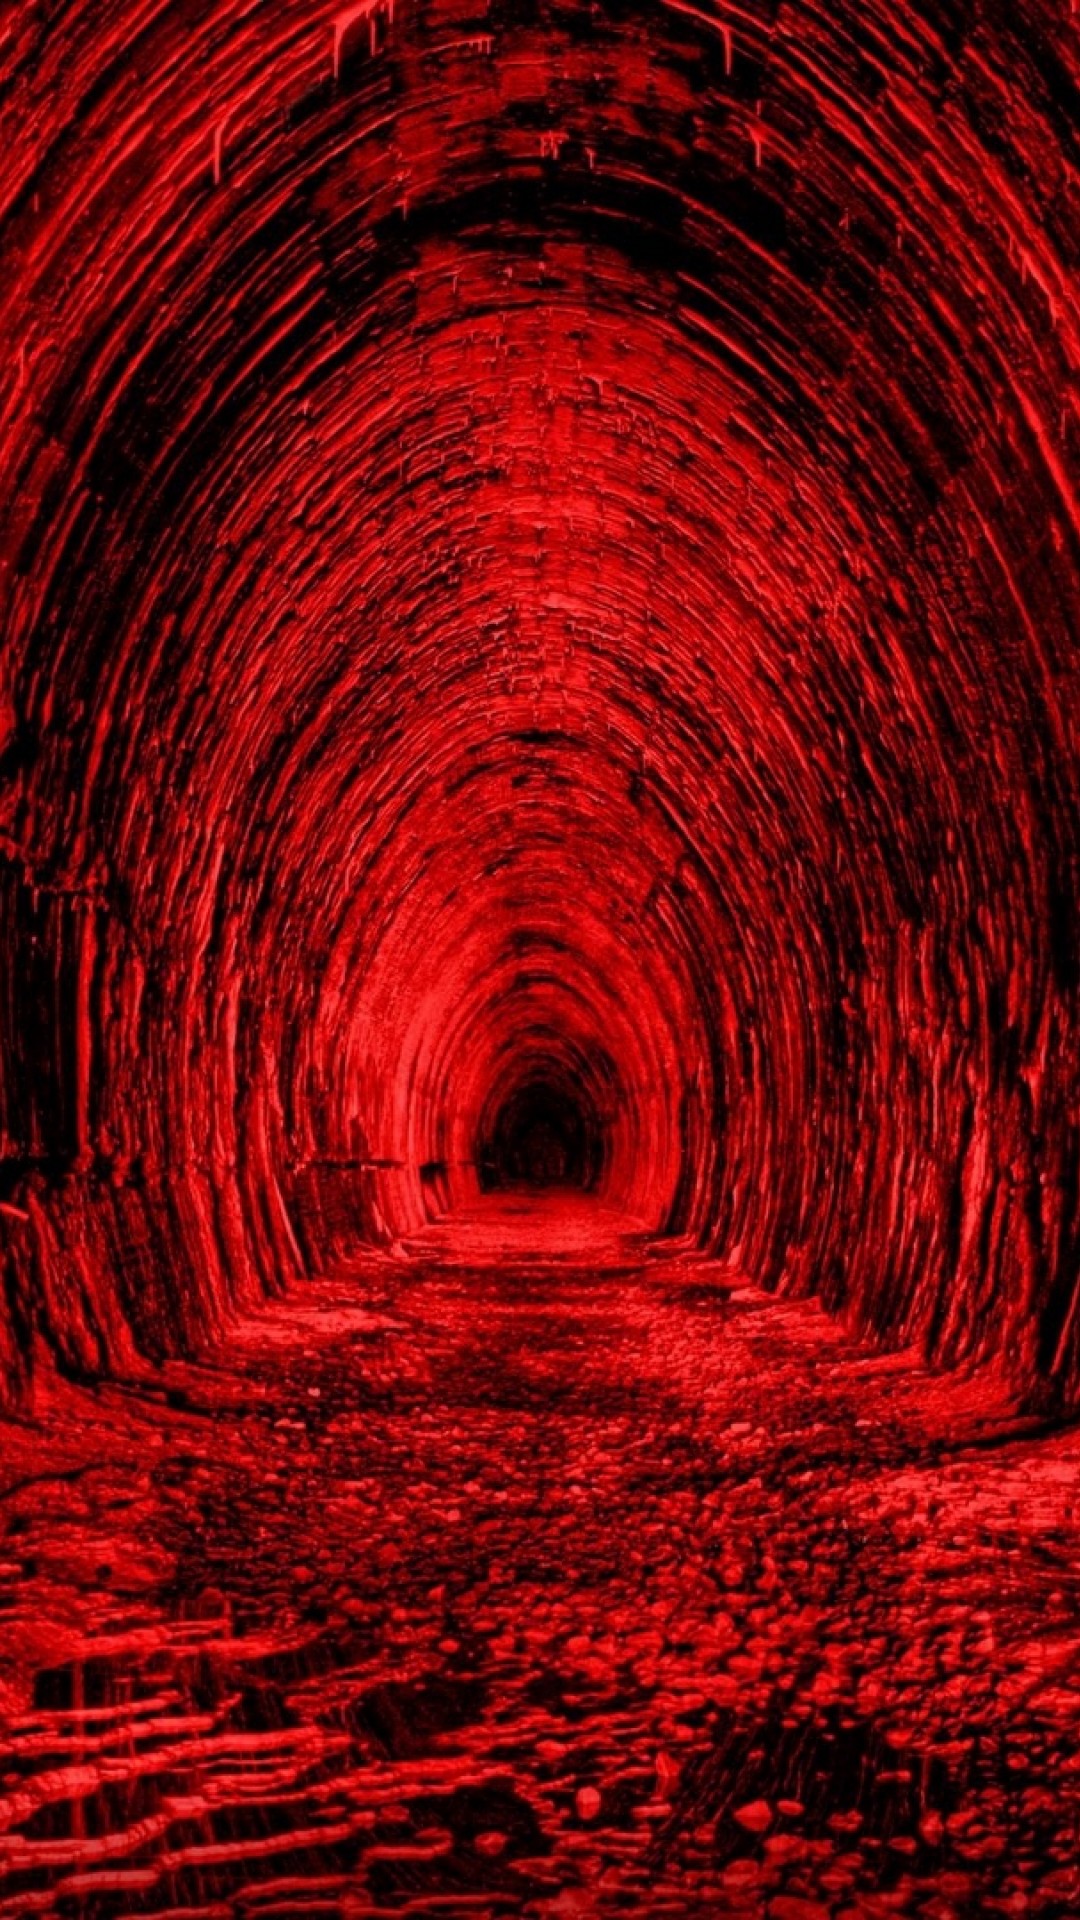 Scary red tunnel HD Wallpaper